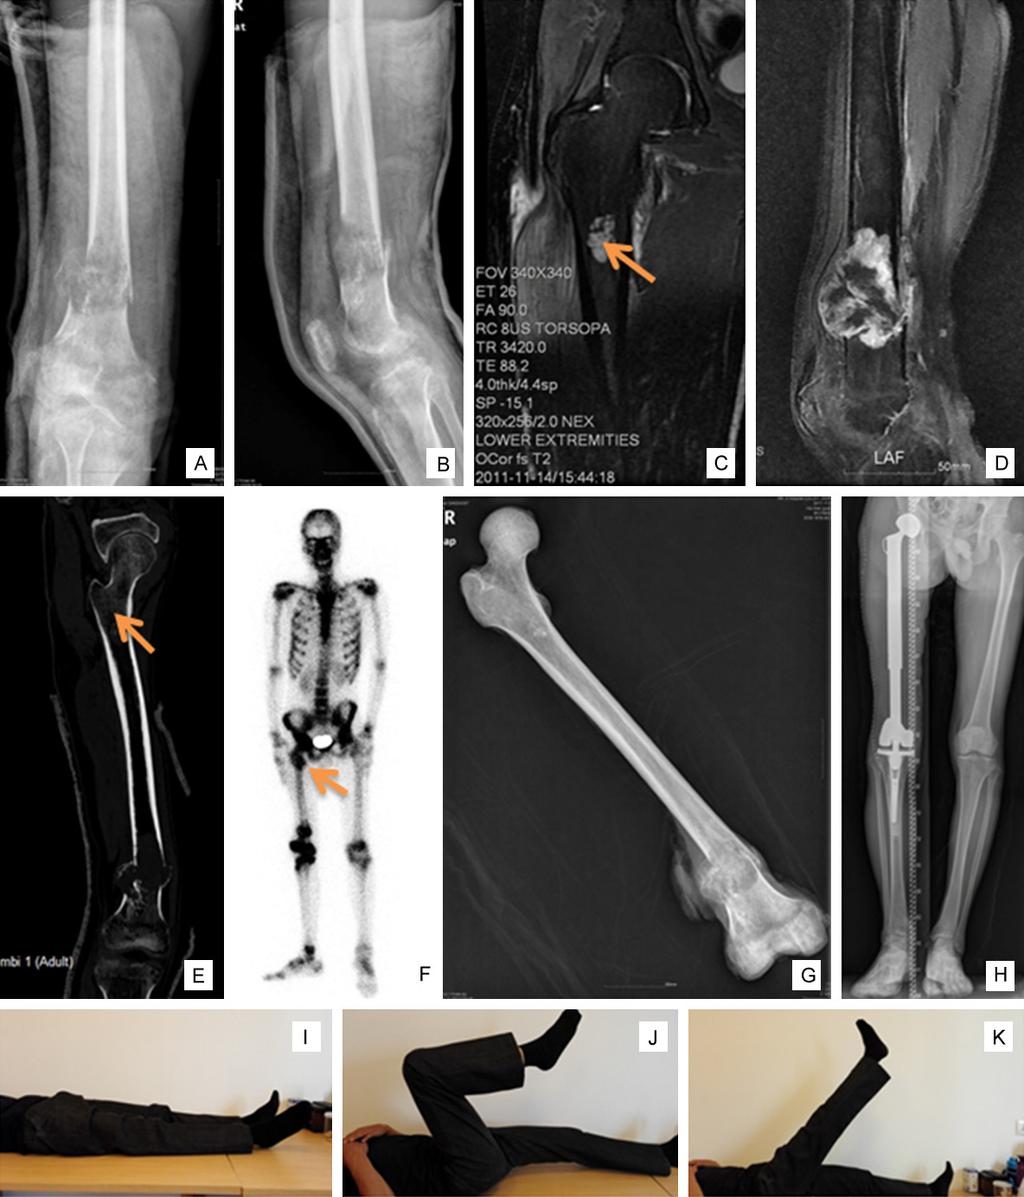 Figure 1. A 33-year-old man with osteosarcoma who sustained sudden pain in right thigh. In X-ray, there was a tumor with pathologic fracture at the distal femur (A, B).